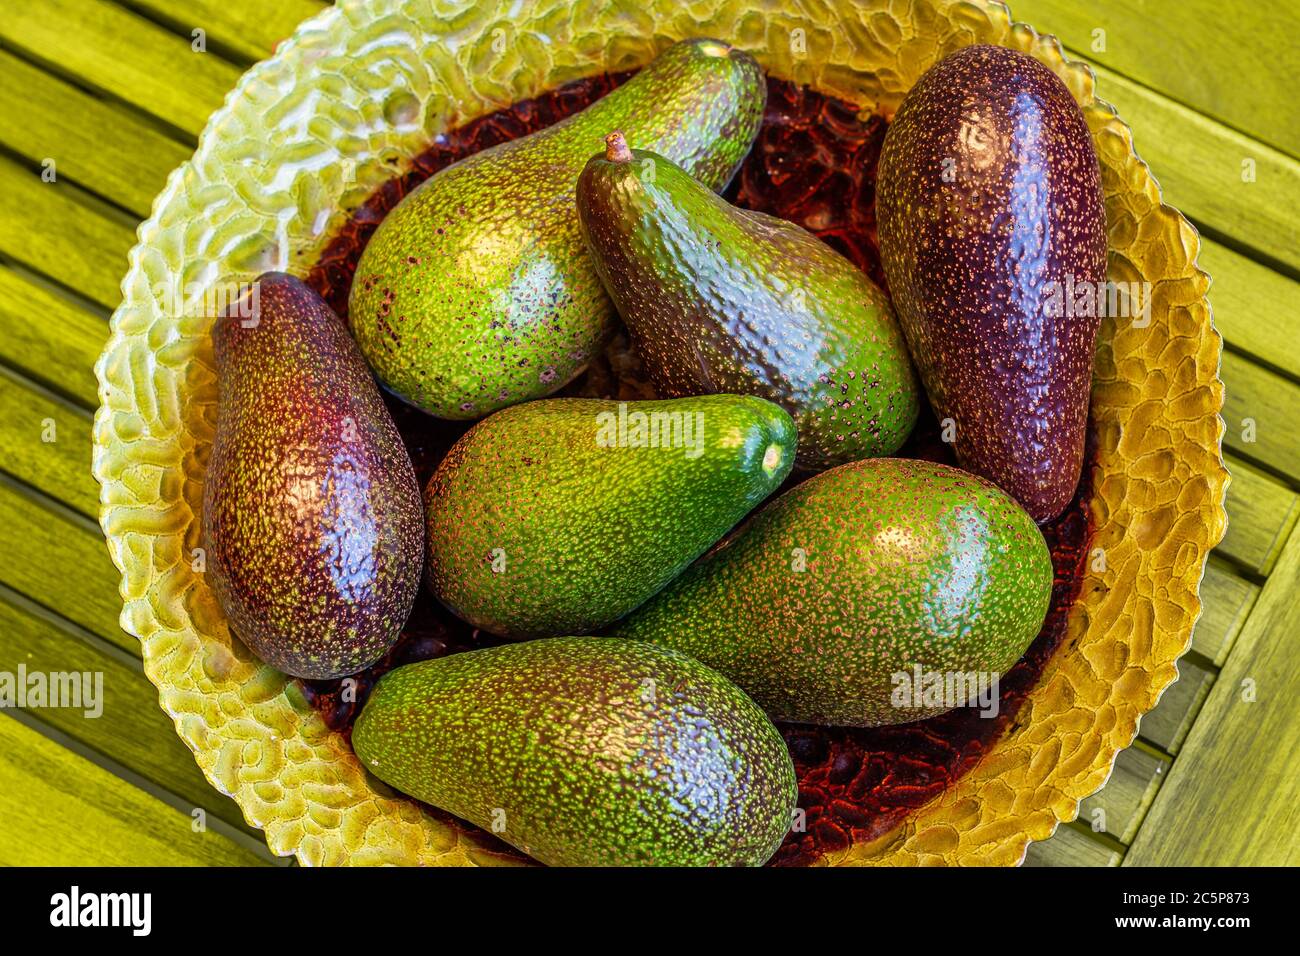 Ripe organic avocados in green plate on wooden background. Healthy eating stile life concept. Detox food. Top view Stock Photo